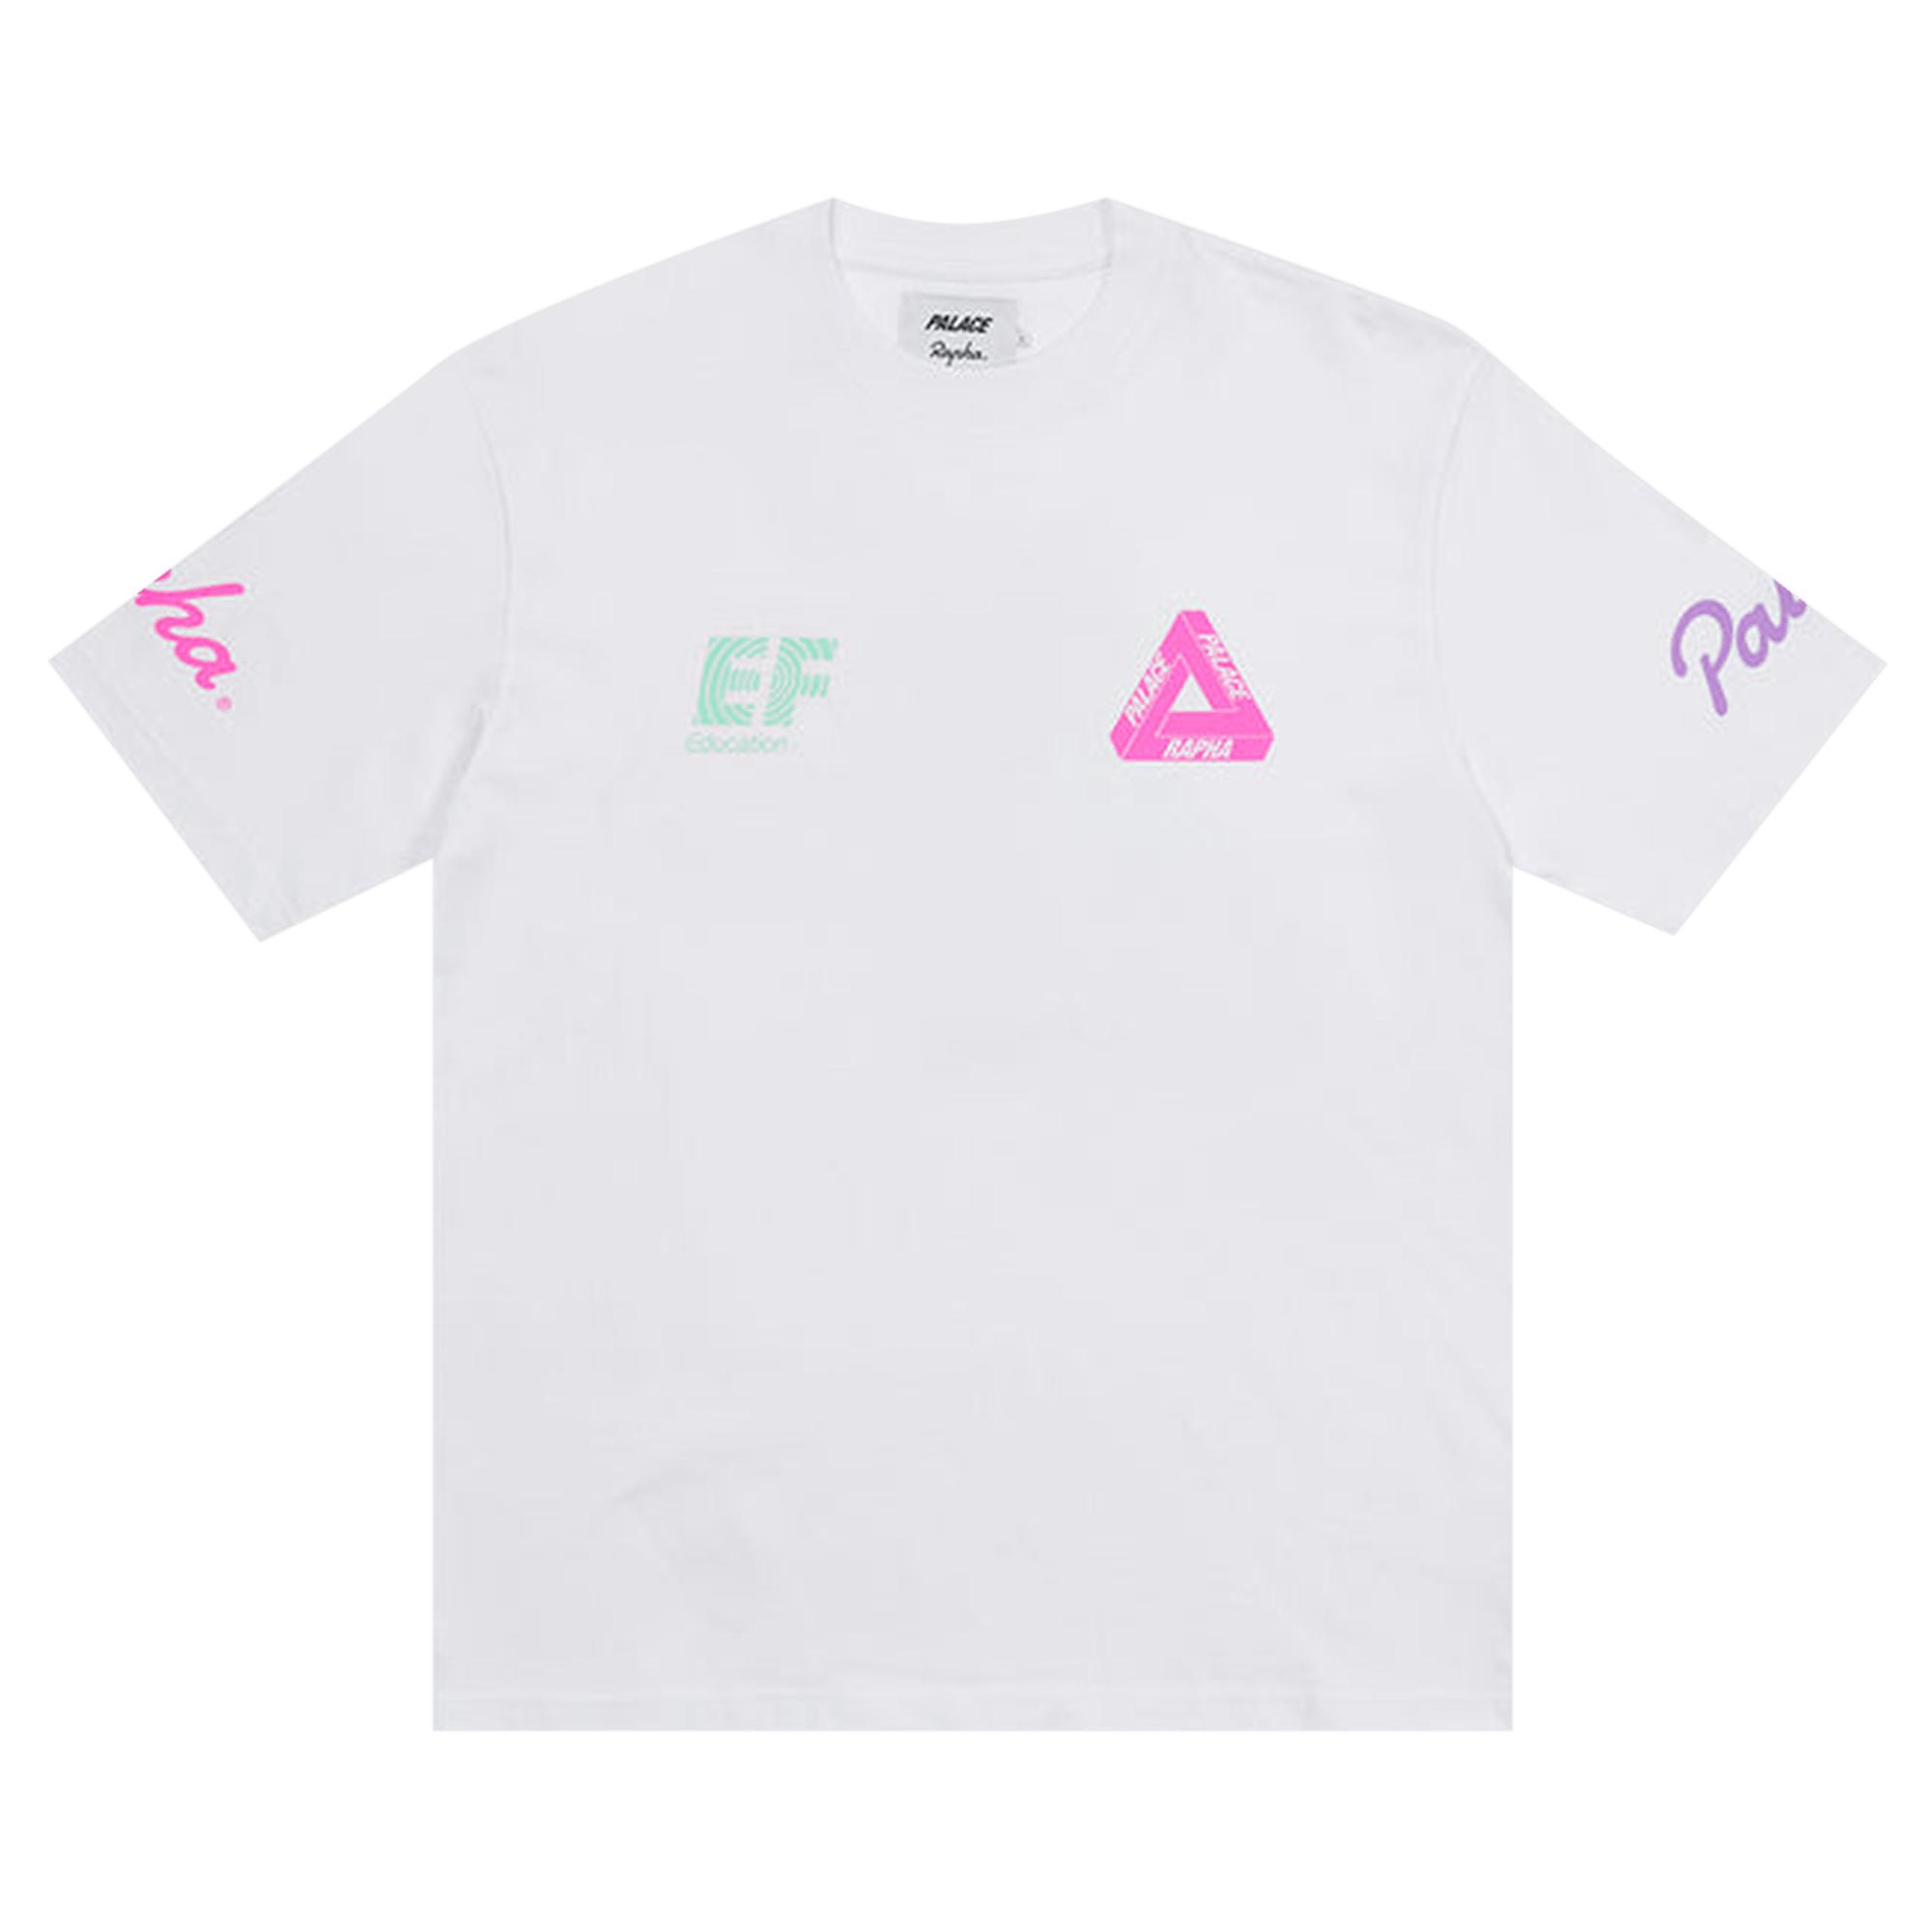 Palace X Rapha Ef Education First T-shirt 'white' for Men | Lyst